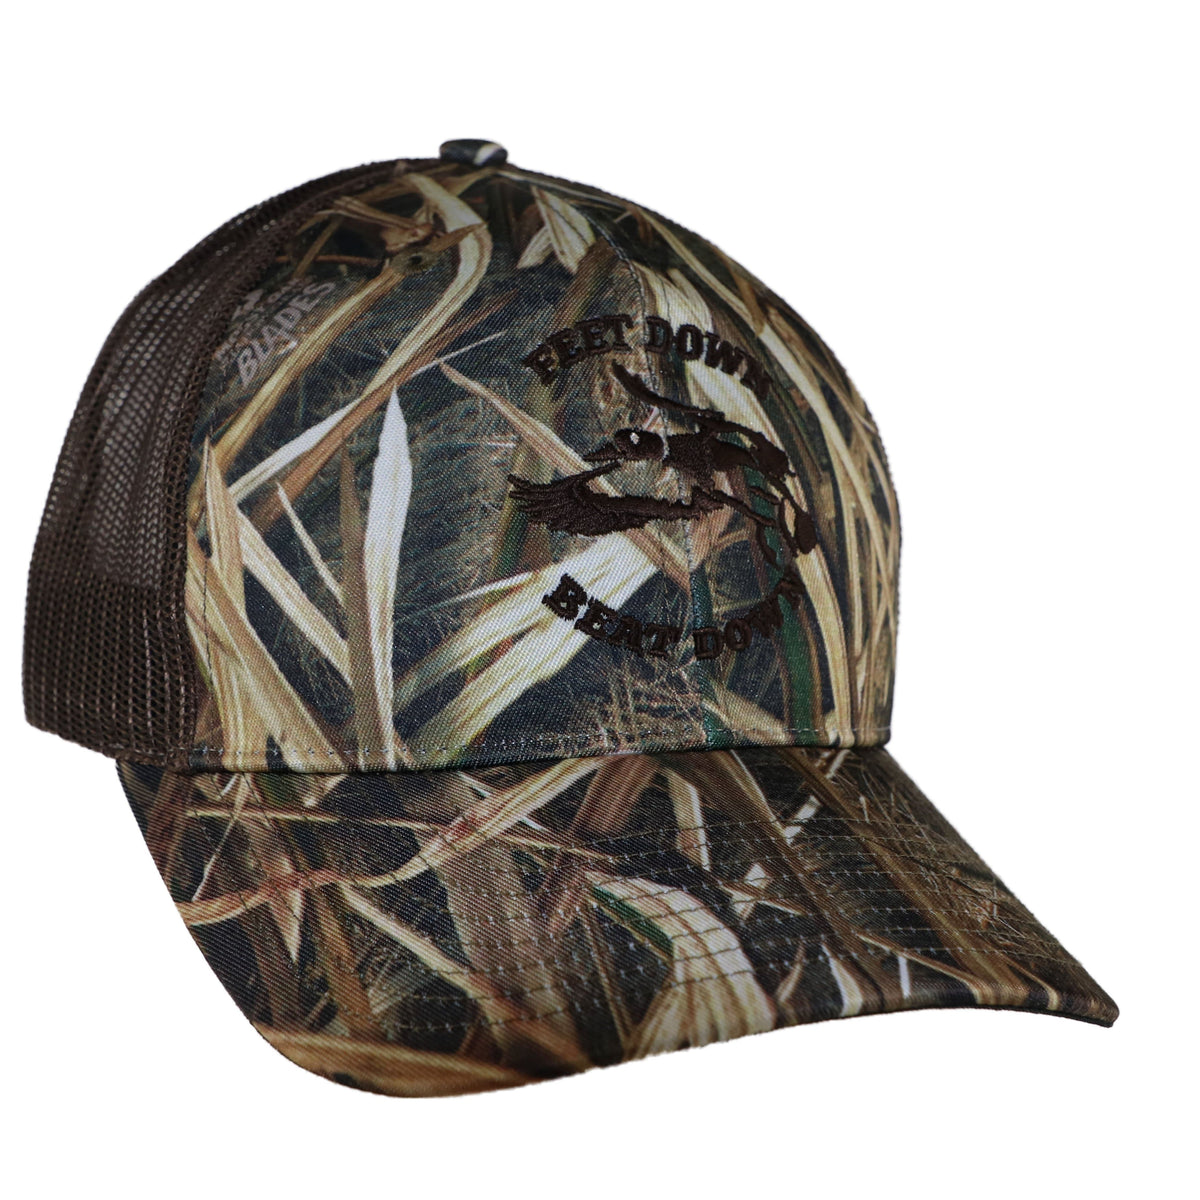 Feet Down Beat Down- Leather Patch Hat - Bent Brim Cap Olive and Tan